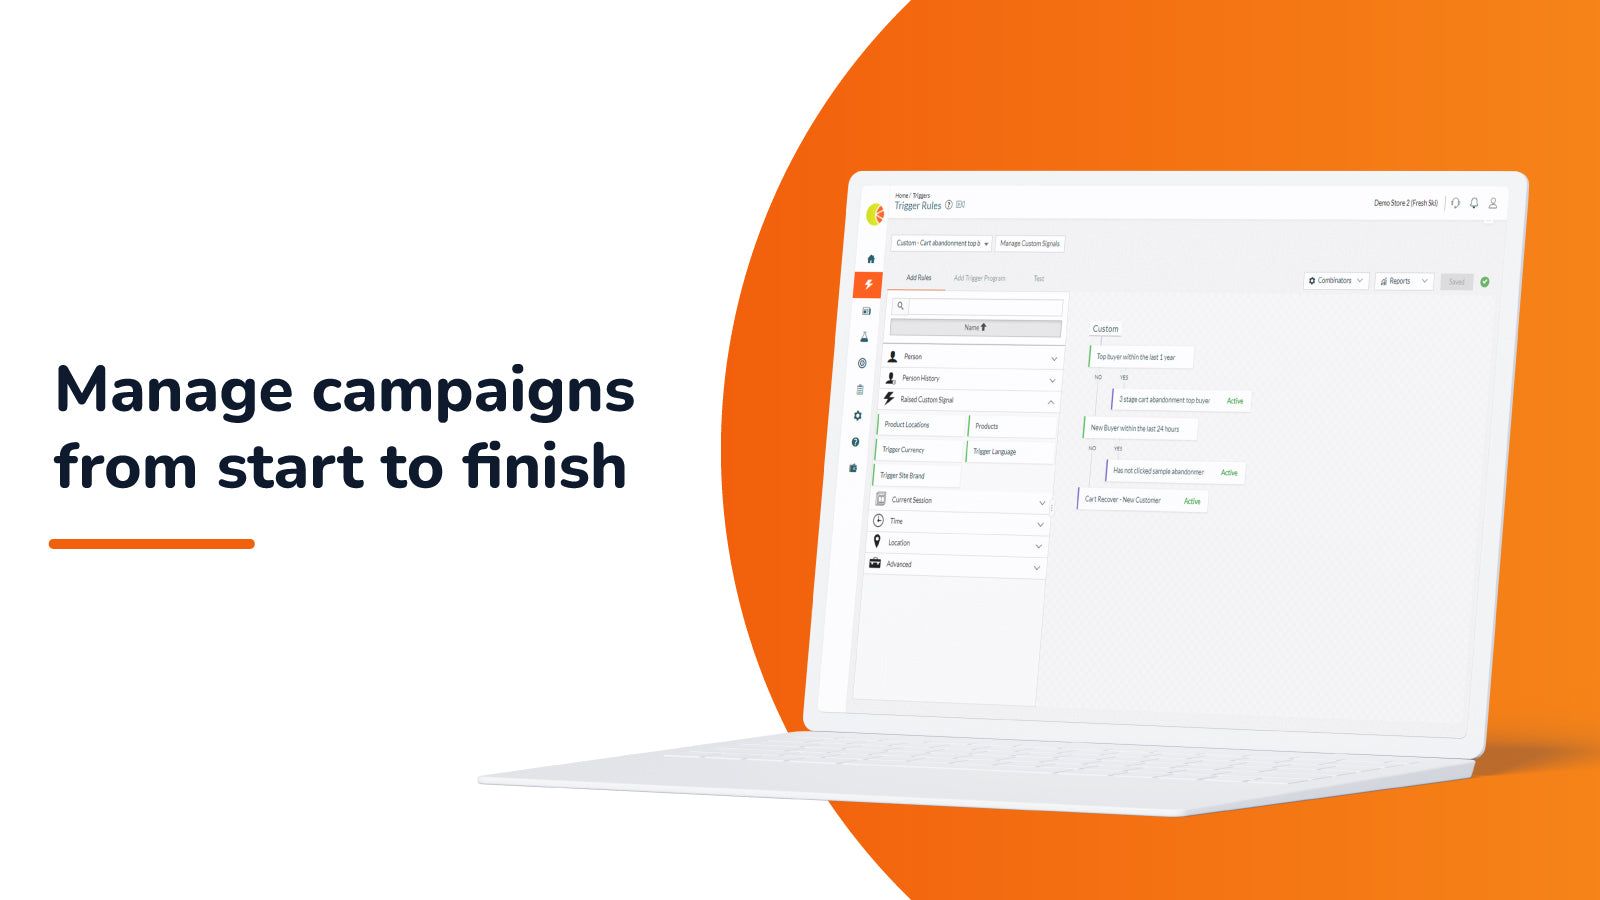 Manage campaigns from start to finish